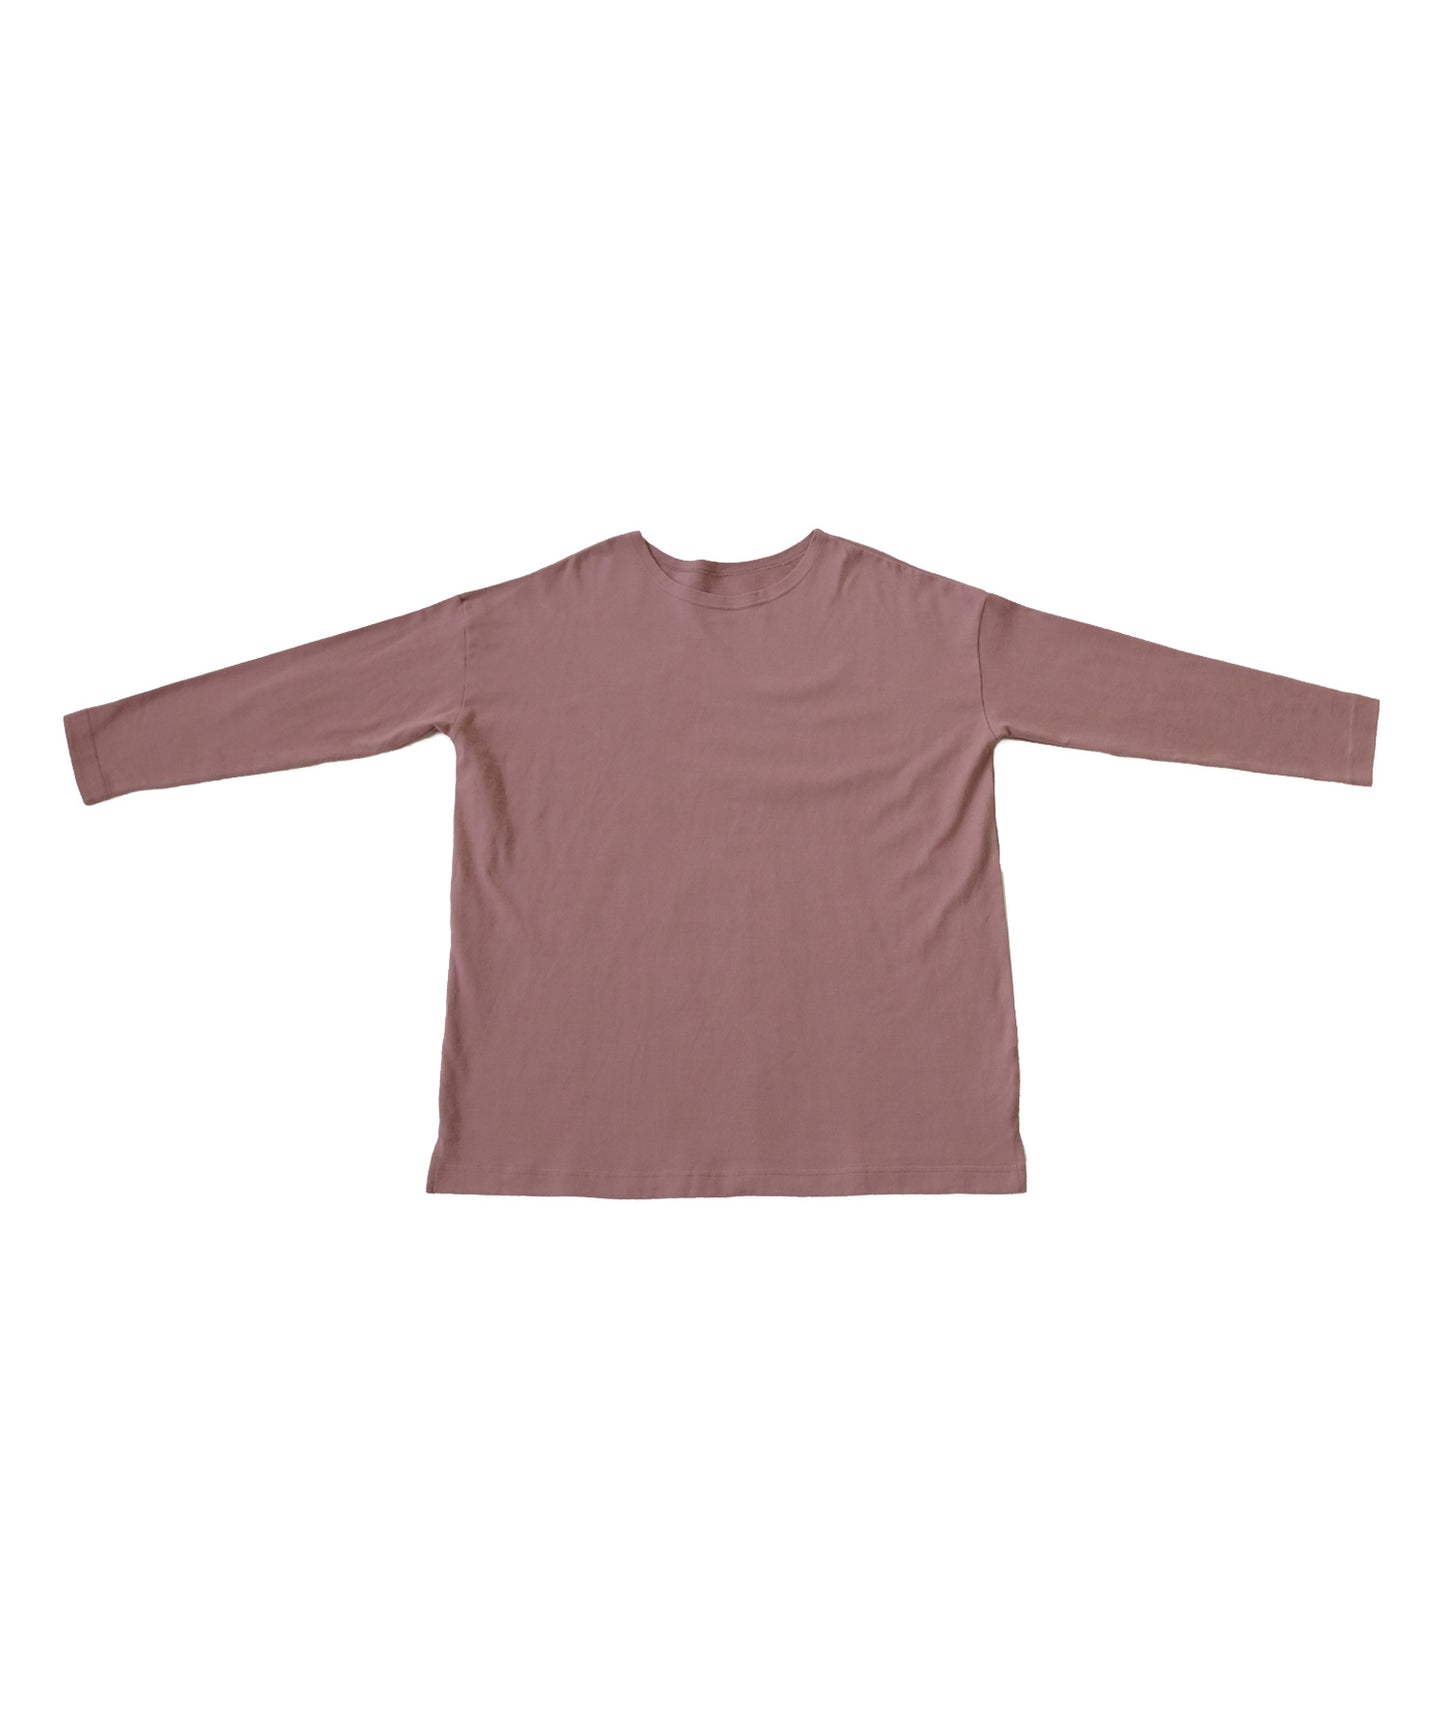 Basque fabric Long-sleeved T-shirtT Ladies Tops Cotton100%